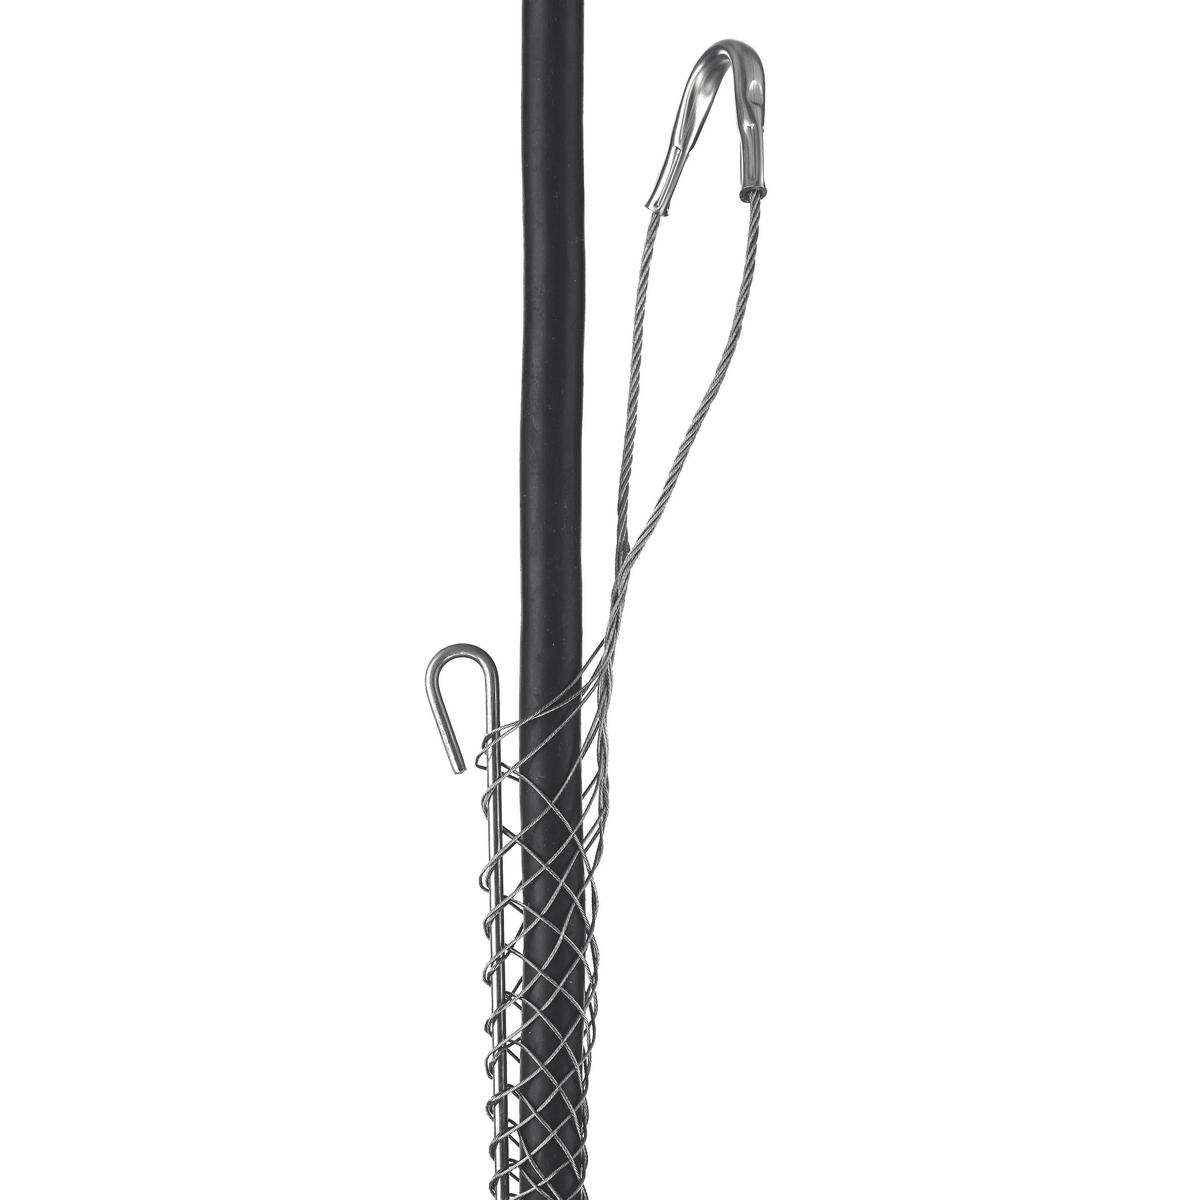 Hubbell 02403037 Support Grips, Offset Eye, Single Weave, Split Mesh, Rod Closing, Stainless Steel, 0.50-0.62"  ; Offset eye ; Strand equalizers position wires for equal loading throughout grip length ; Eye assemblies provide eye reinforcement at support hardware ; Split 